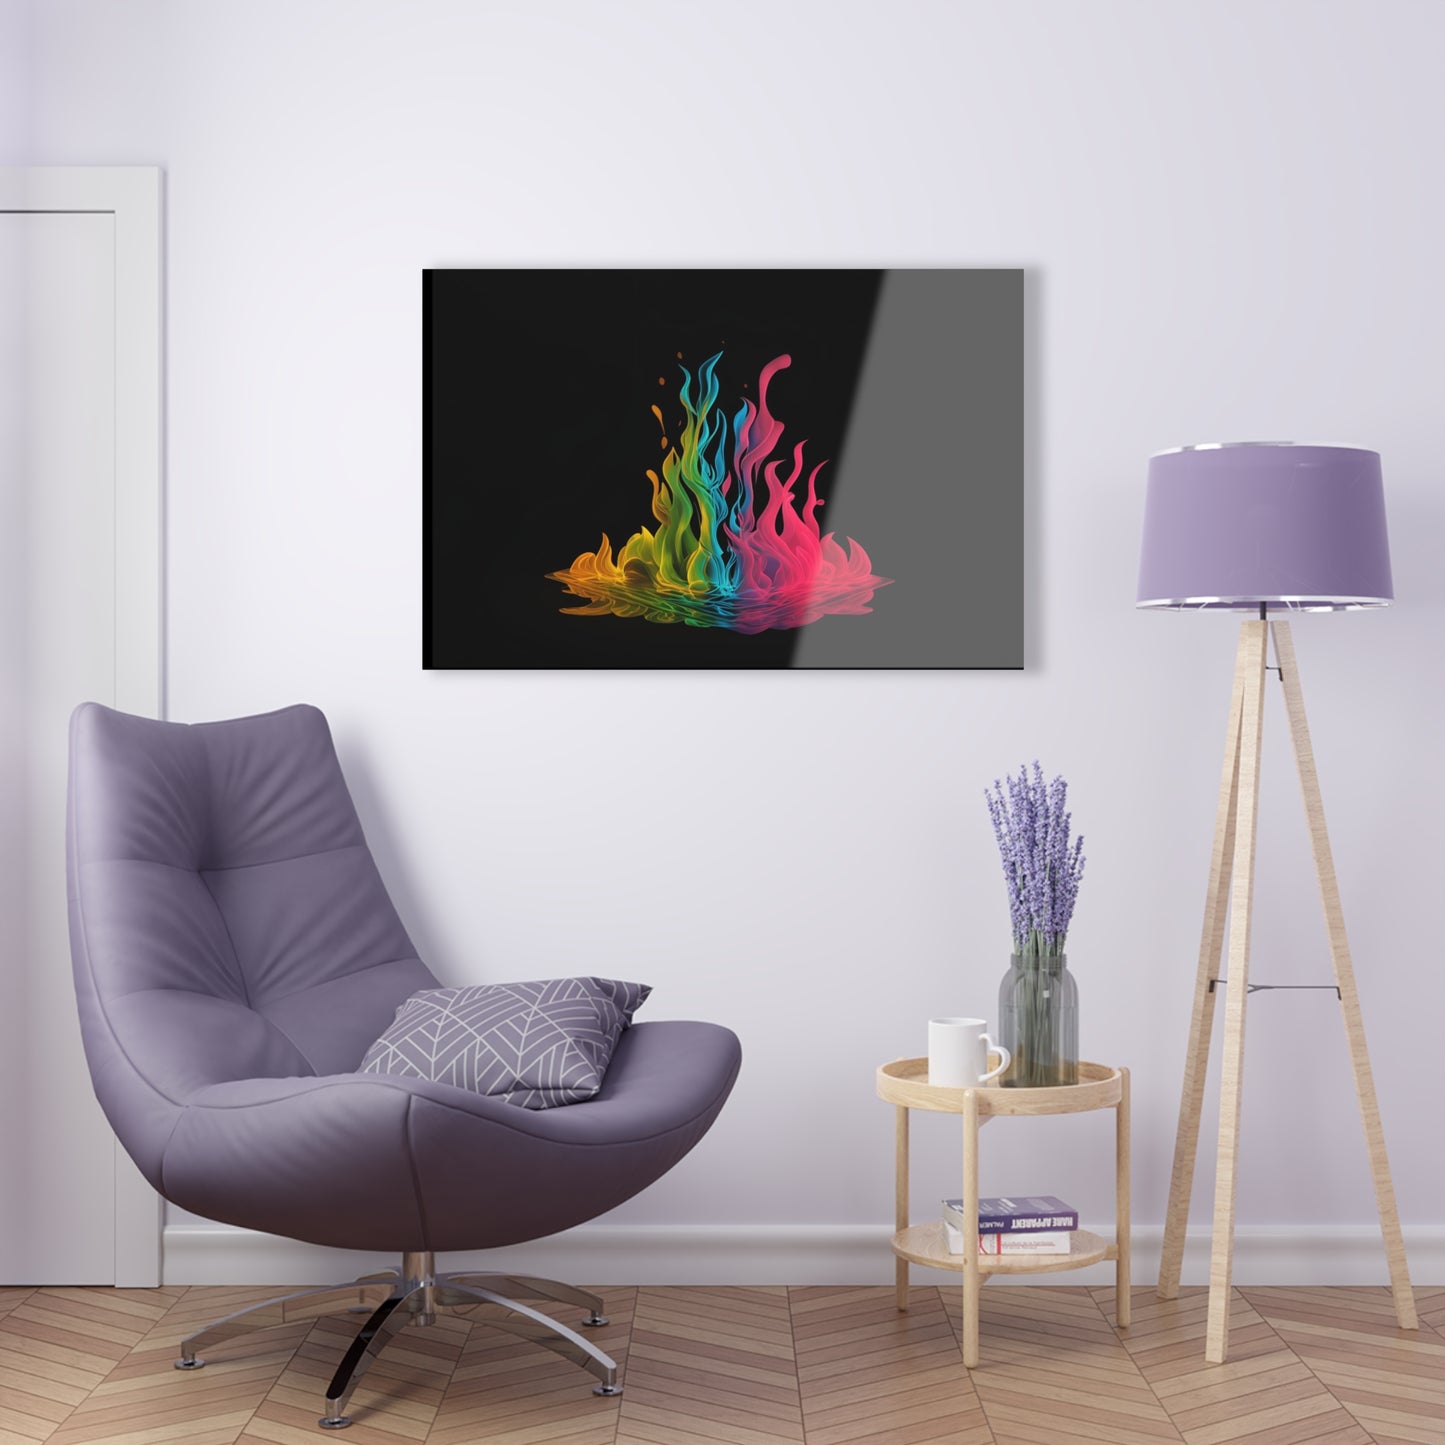 Abstracts Art on Jet Black Acrylic Panels for gameroom art gay gift for lgbtq lovers ally femme style art horizontal orientaion v4